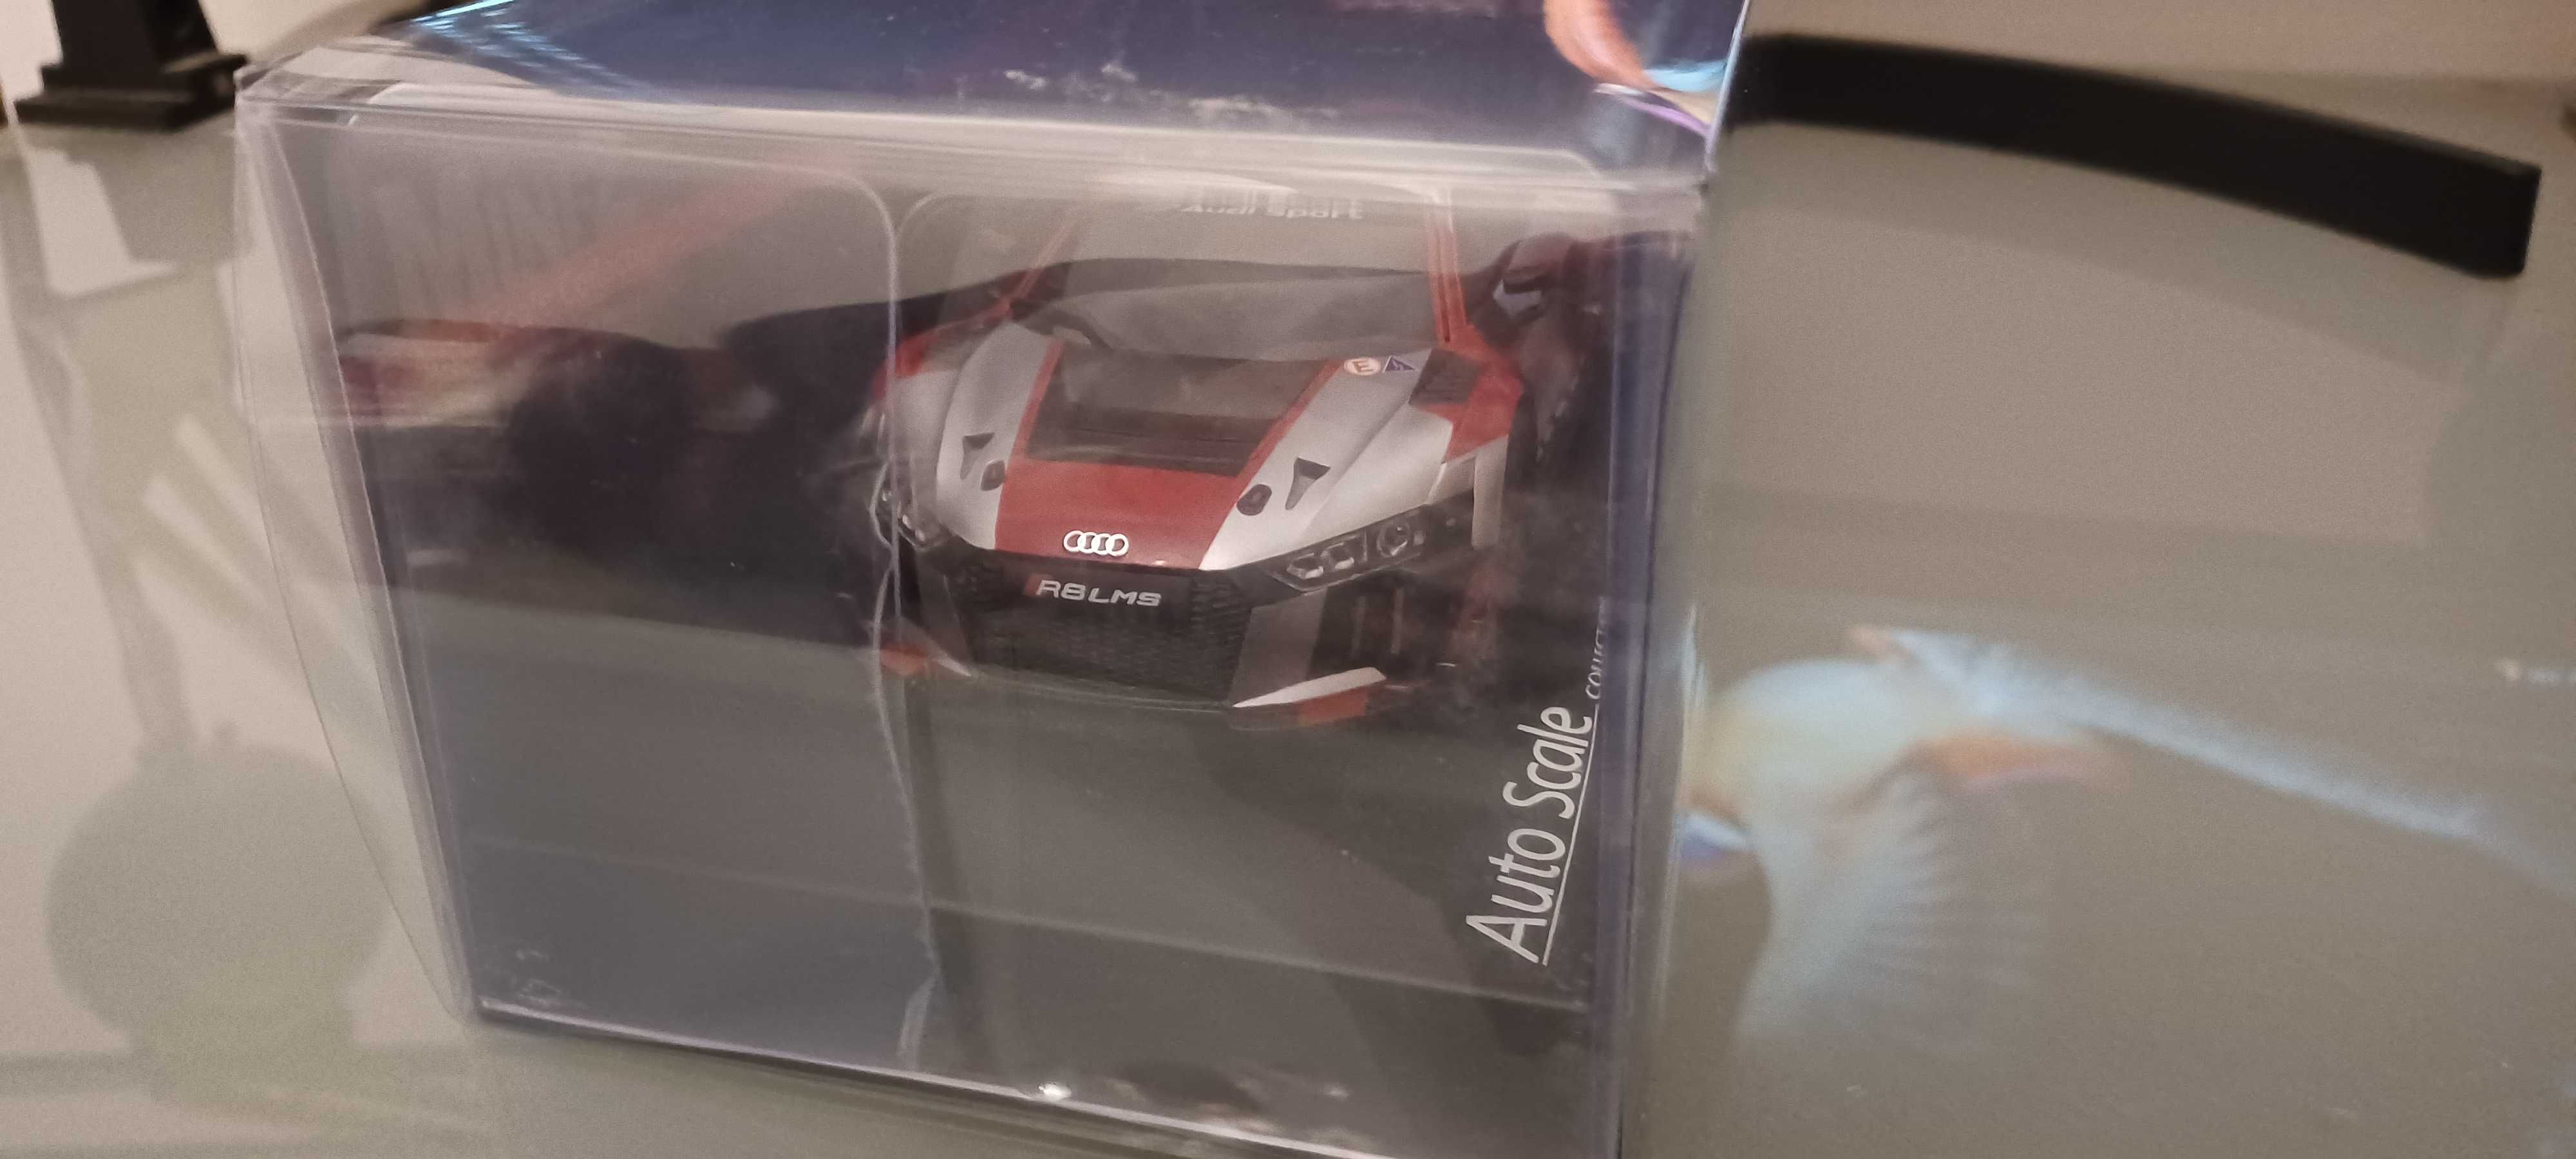 Kyosho Mini-Z Audi R8 LMS 2016 "Gray/Red" - Auto Scale Collection